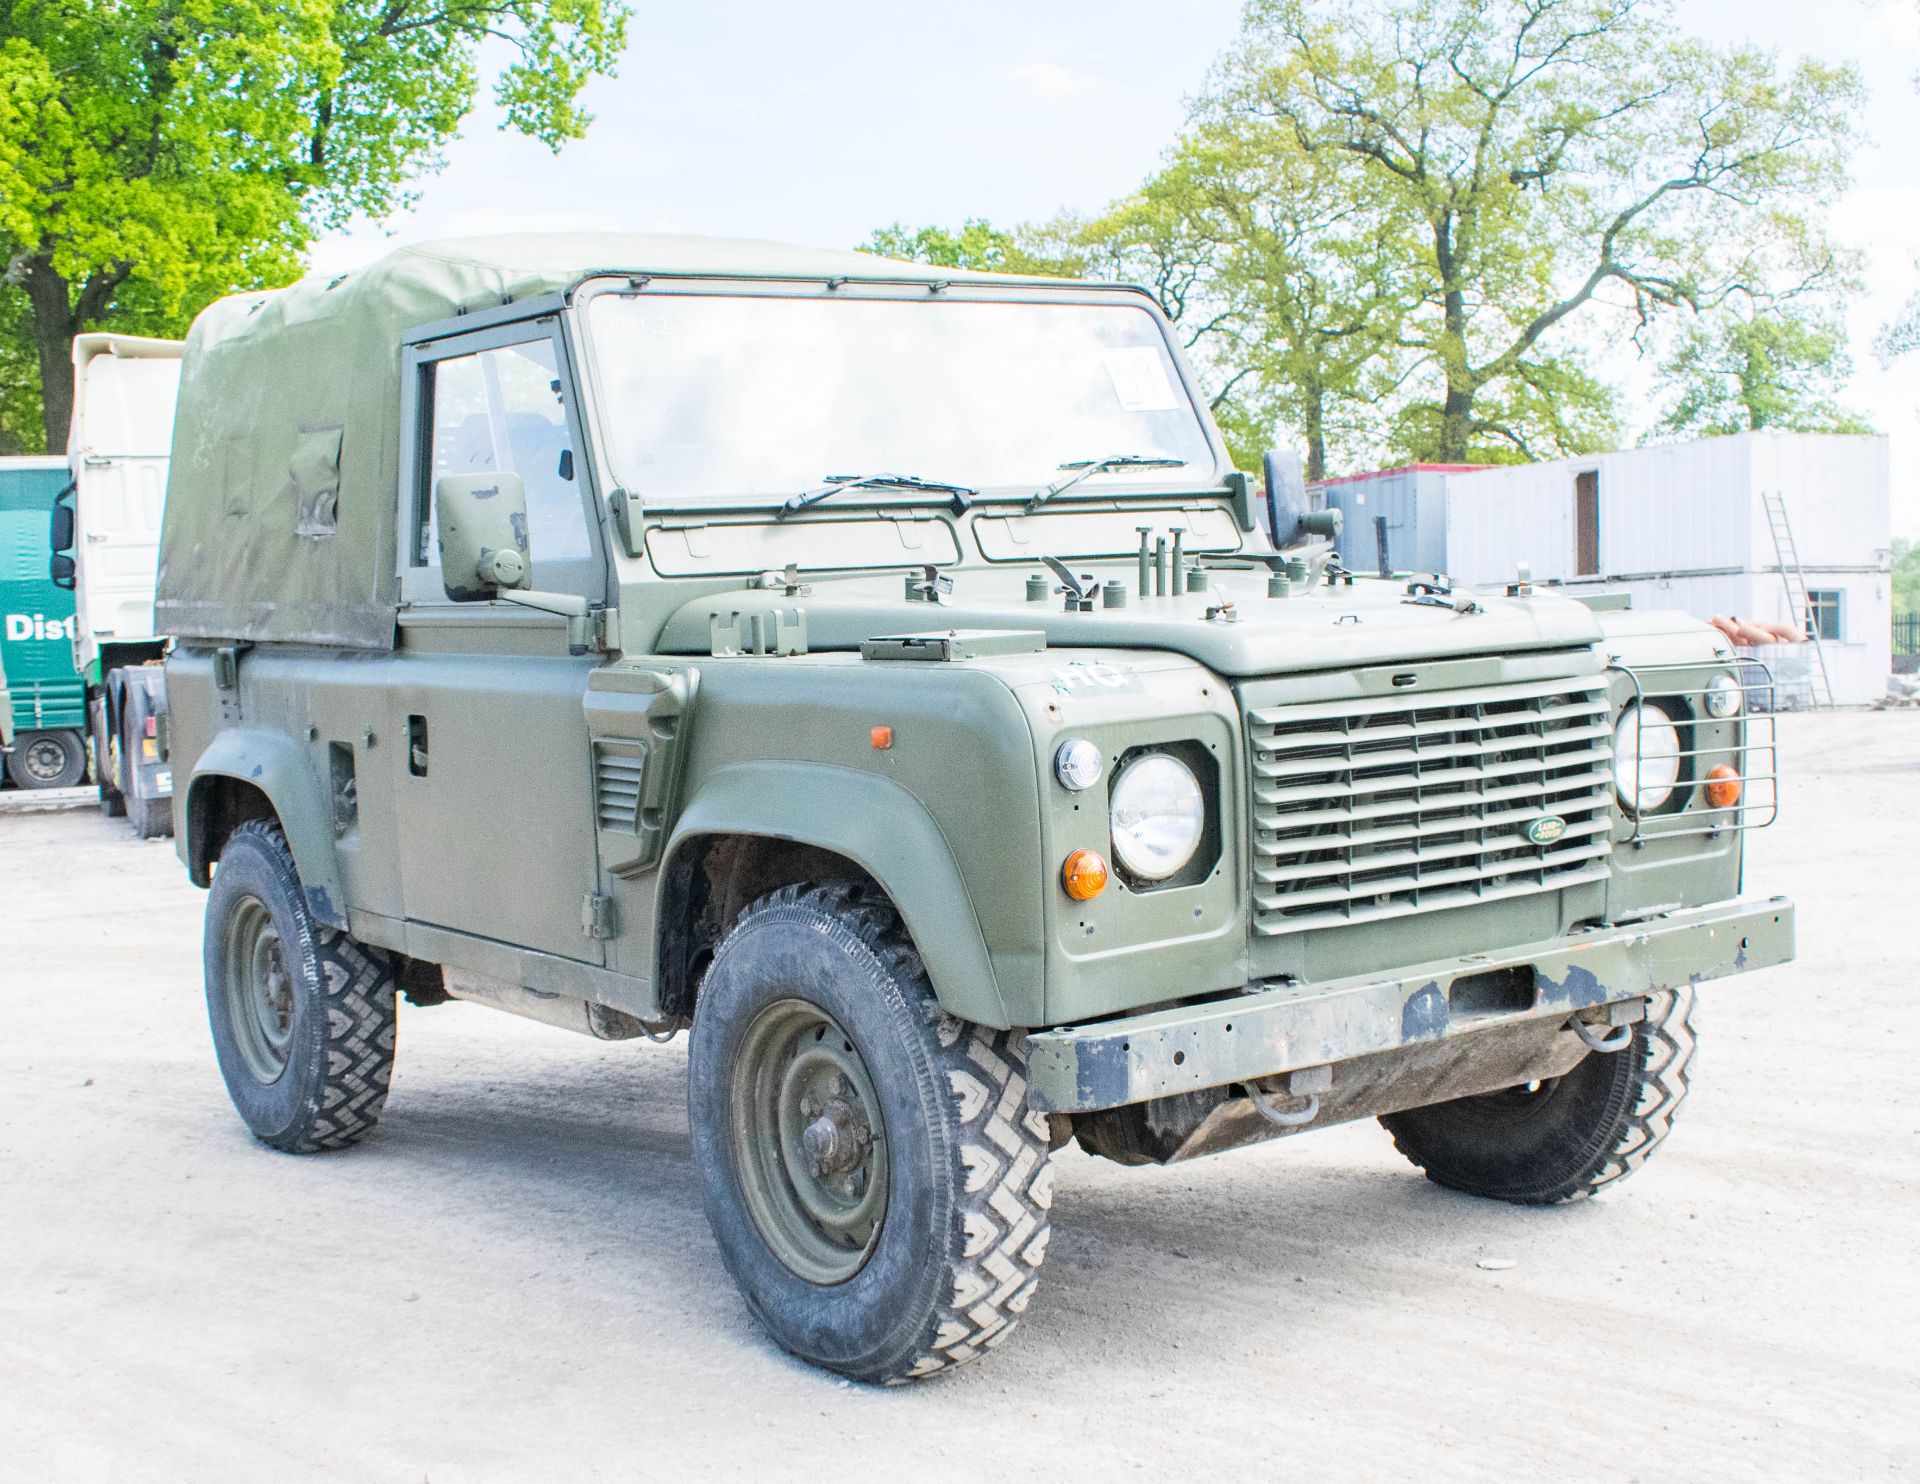 Land Rover Defender 90 Wolf 300 TDI 4wd soft top utility vehicle (EX MOD) Date into Service: 02/03/ - Image 2 of 21